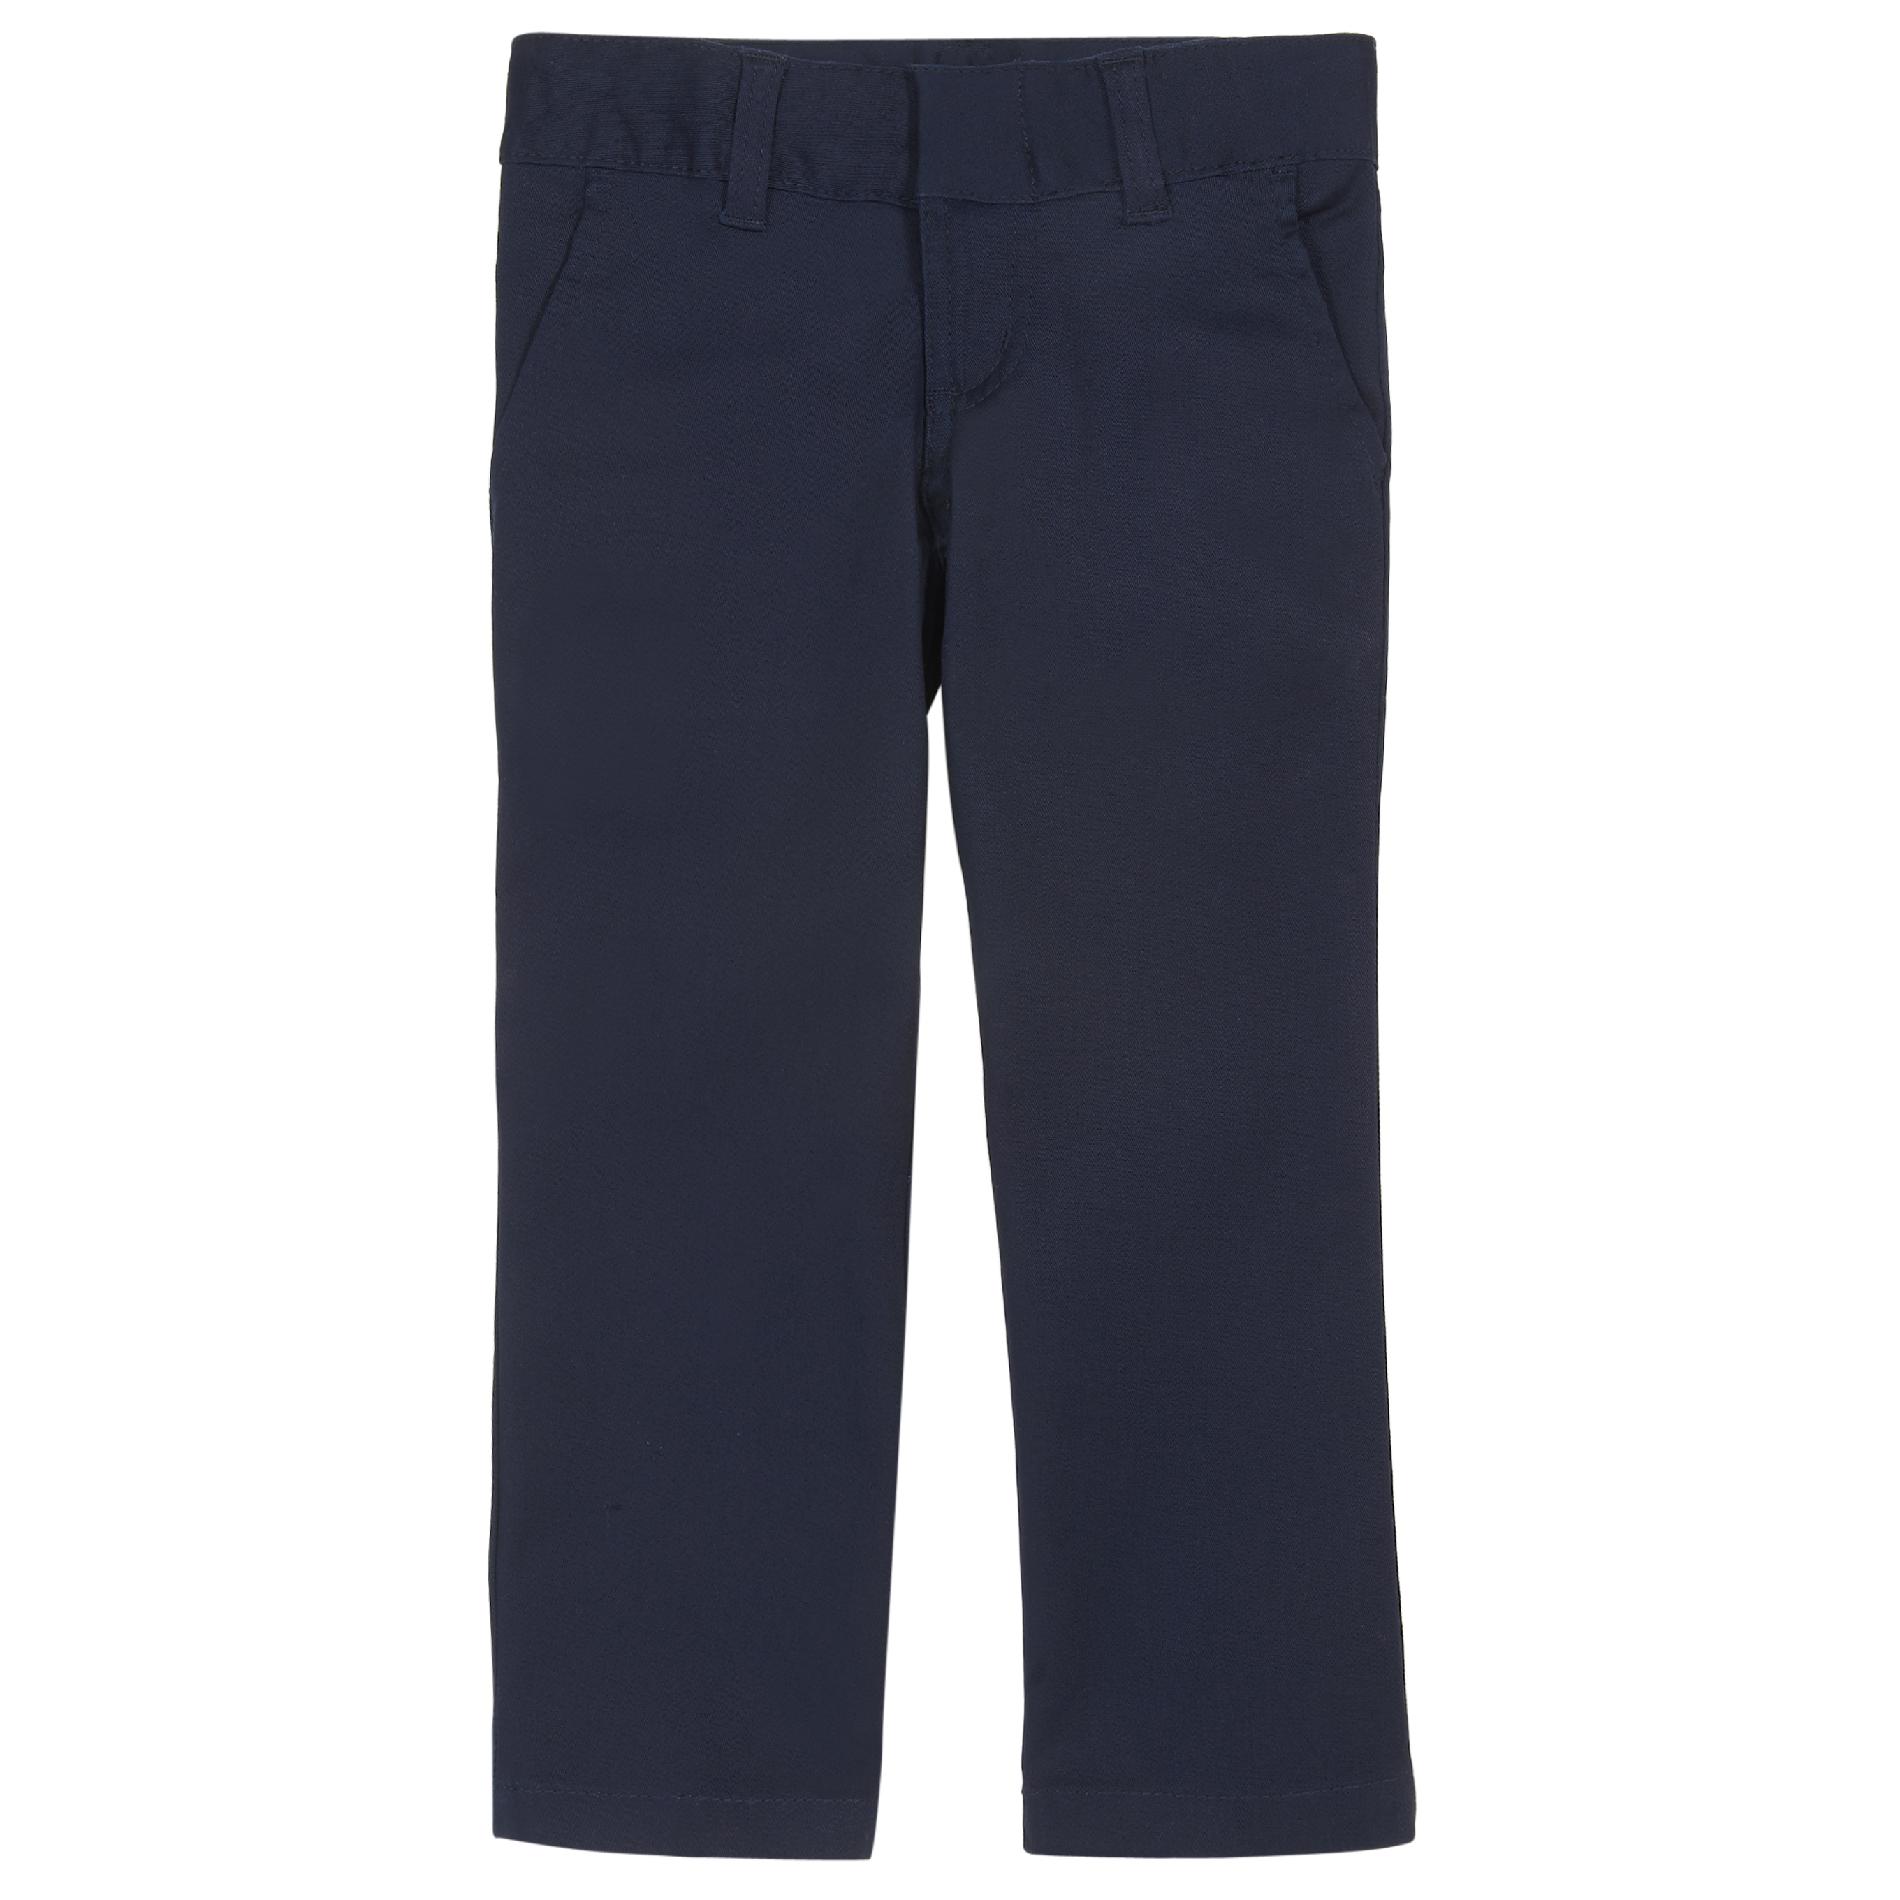 At School by French Toast Stretch Straight Leg Pant